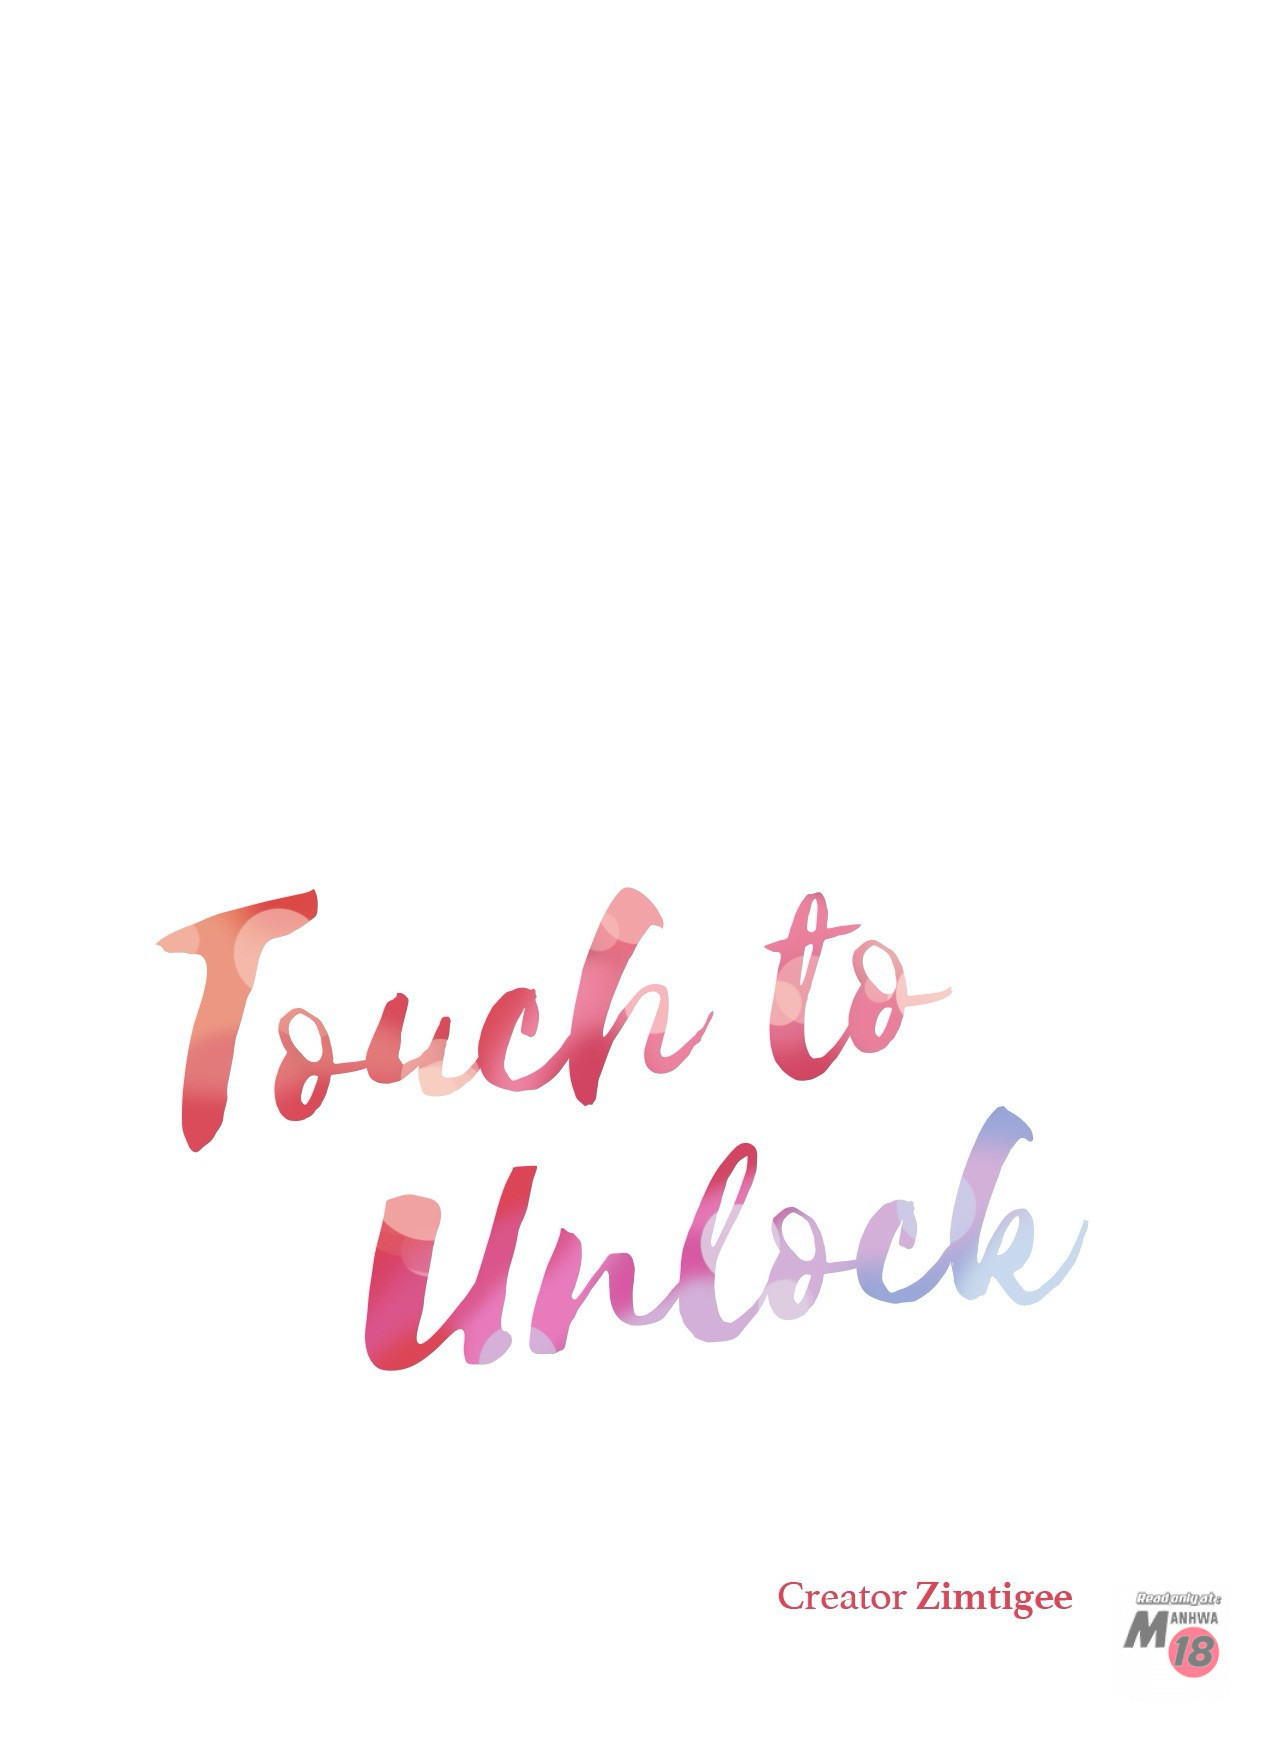 Touch On image